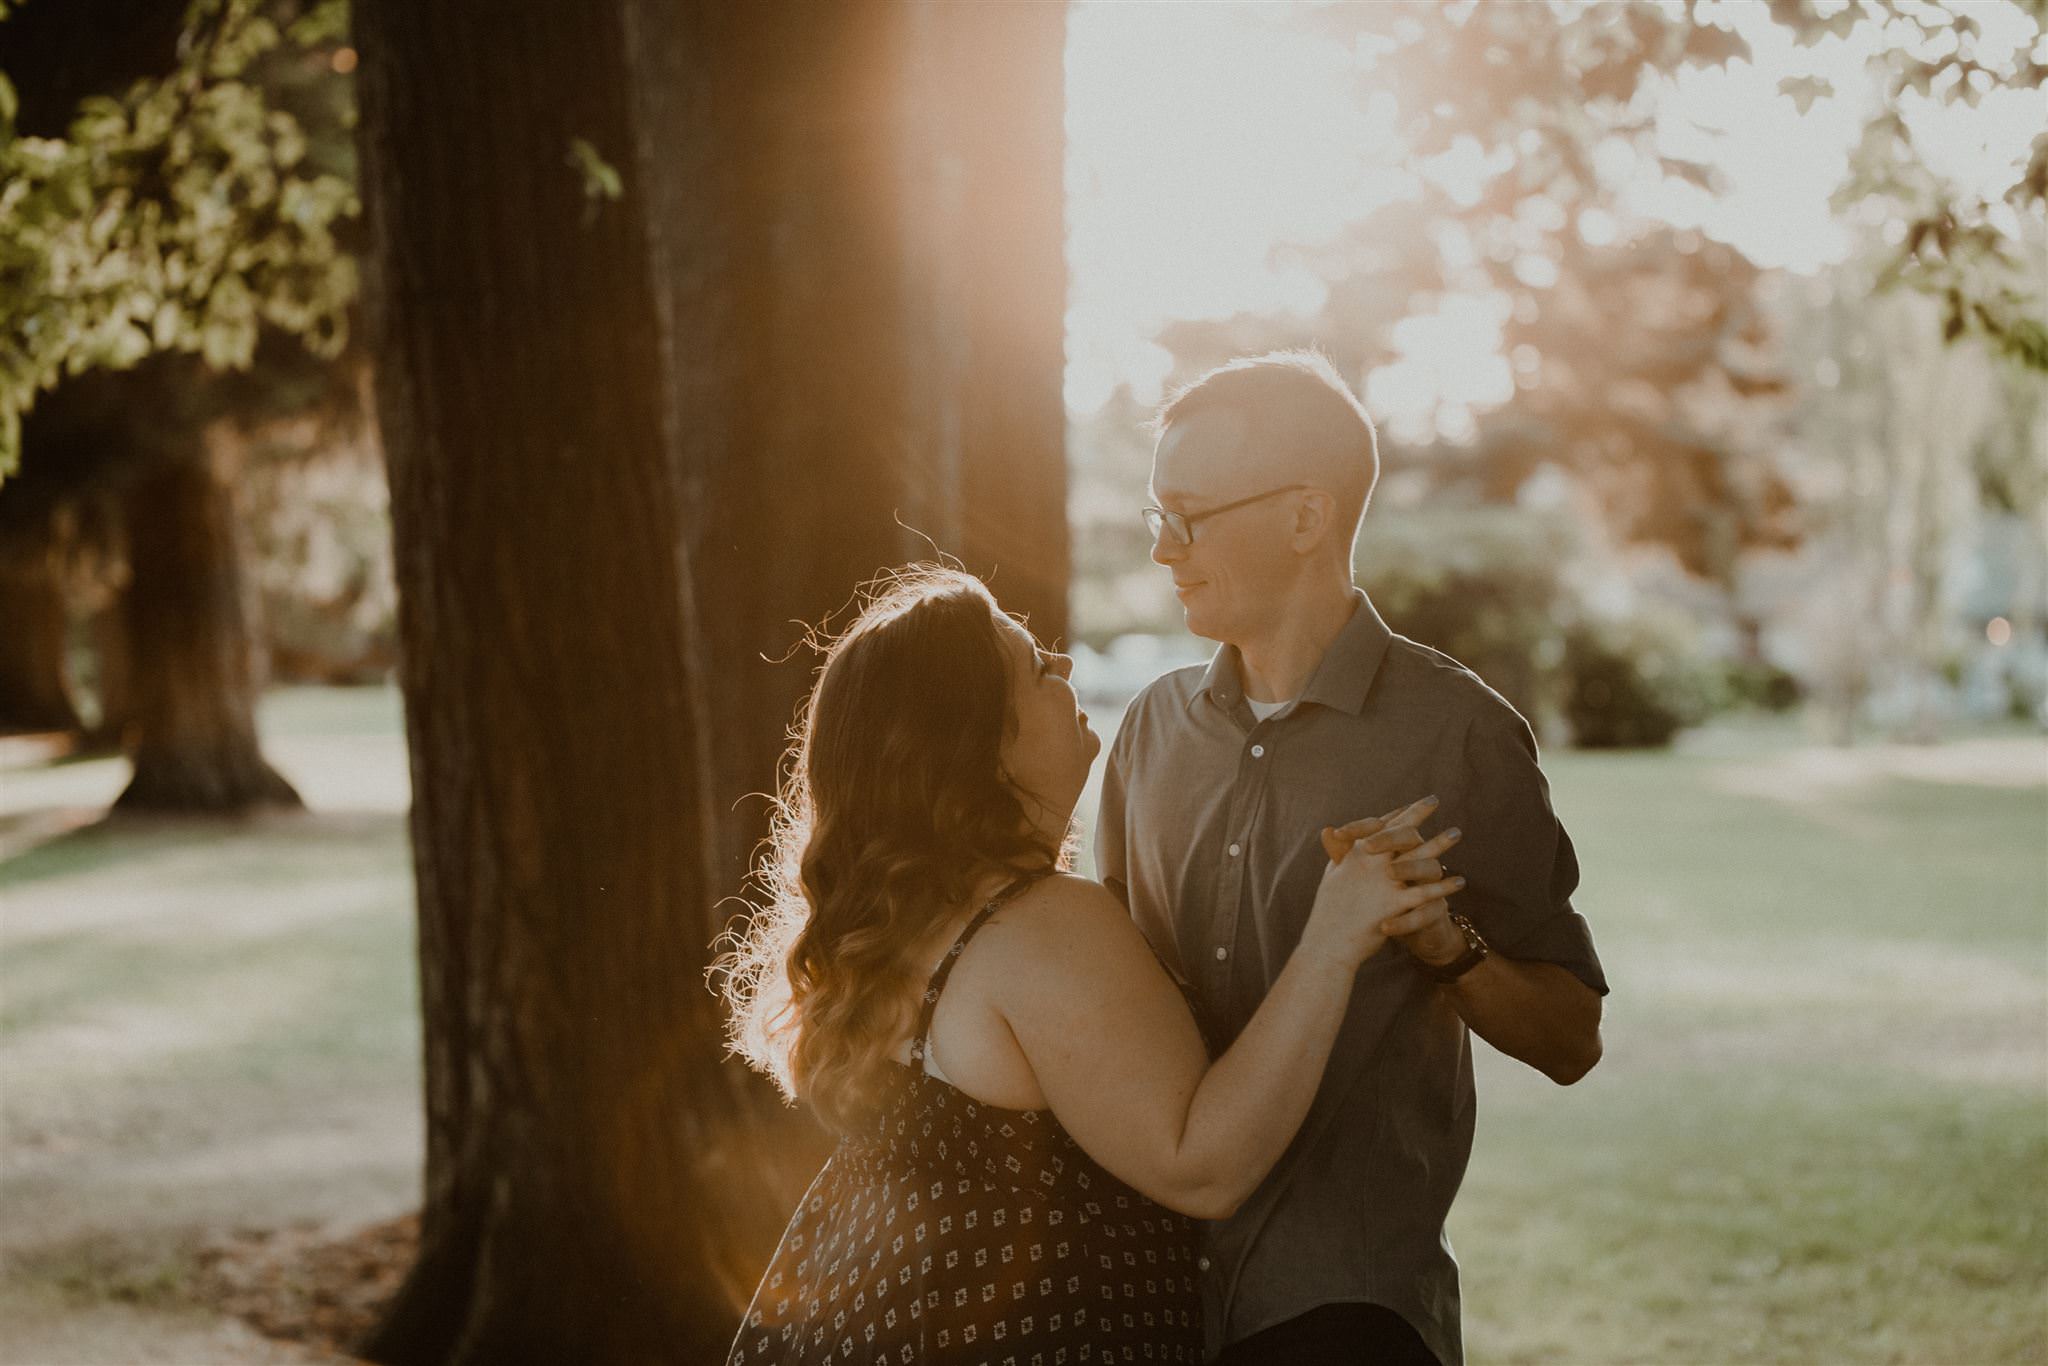 Married couple dancing in the park | PNW couples portraits | www.photomegs.com